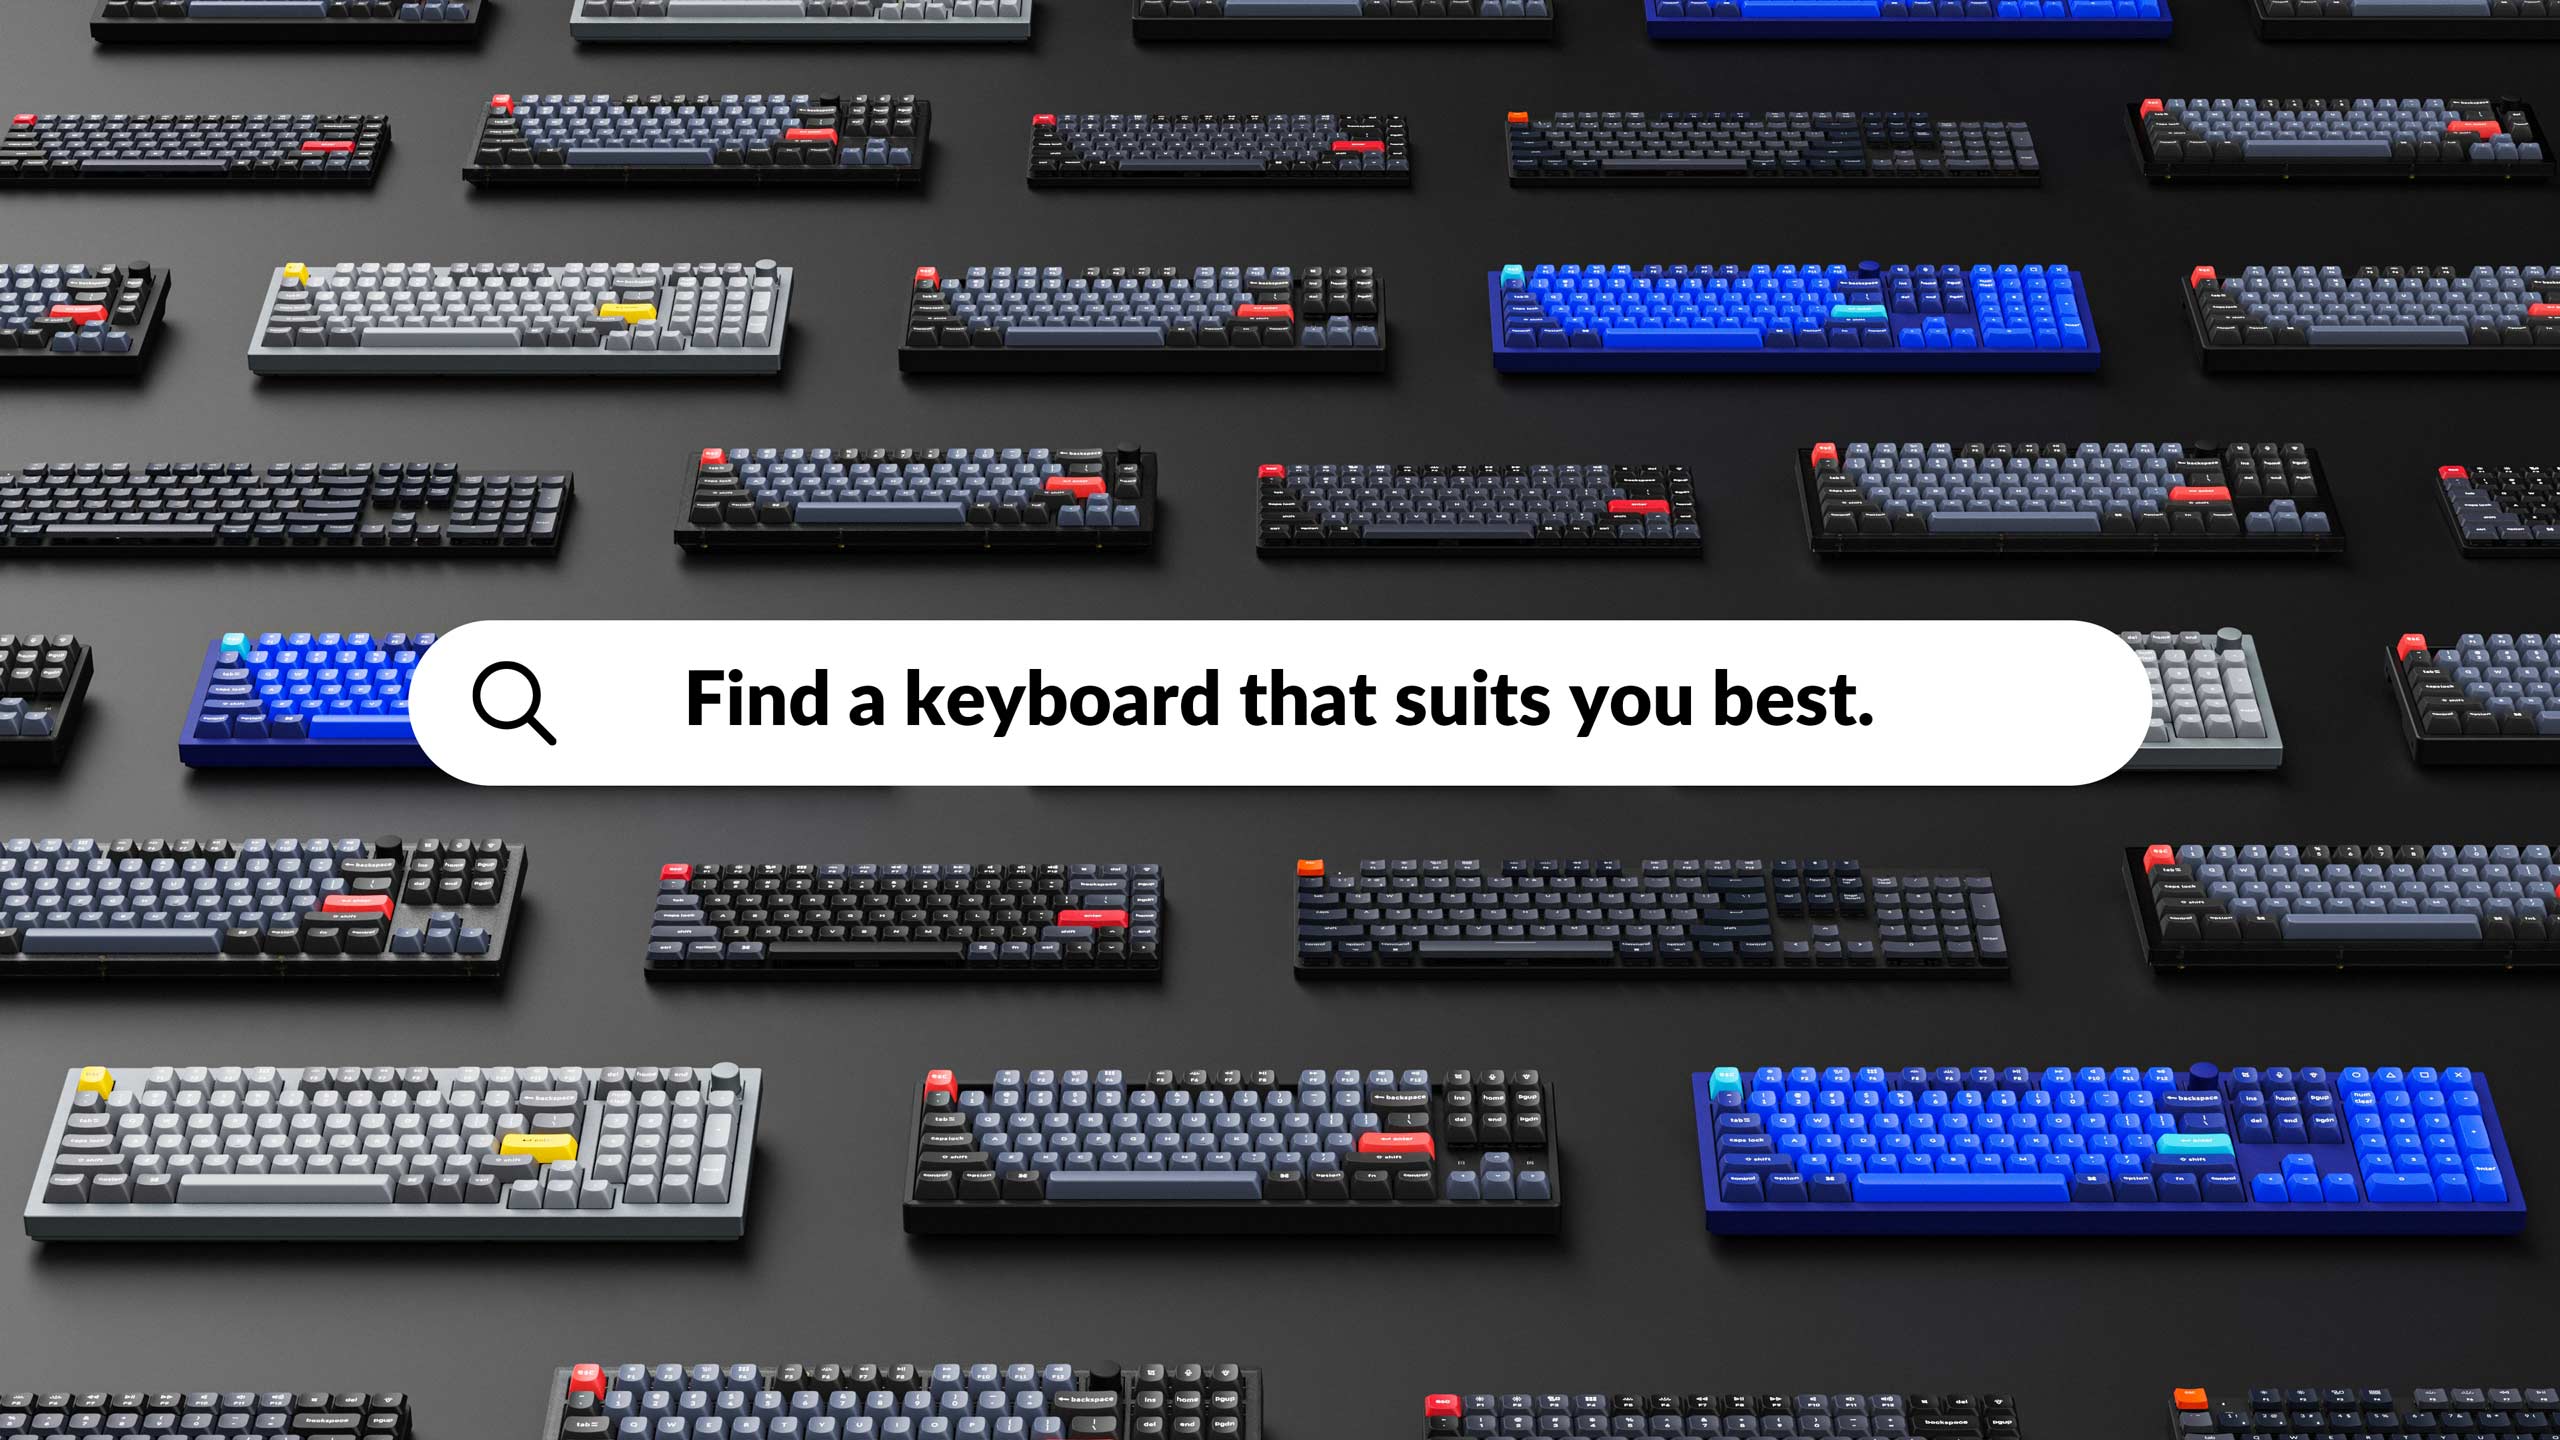 All Keyboards